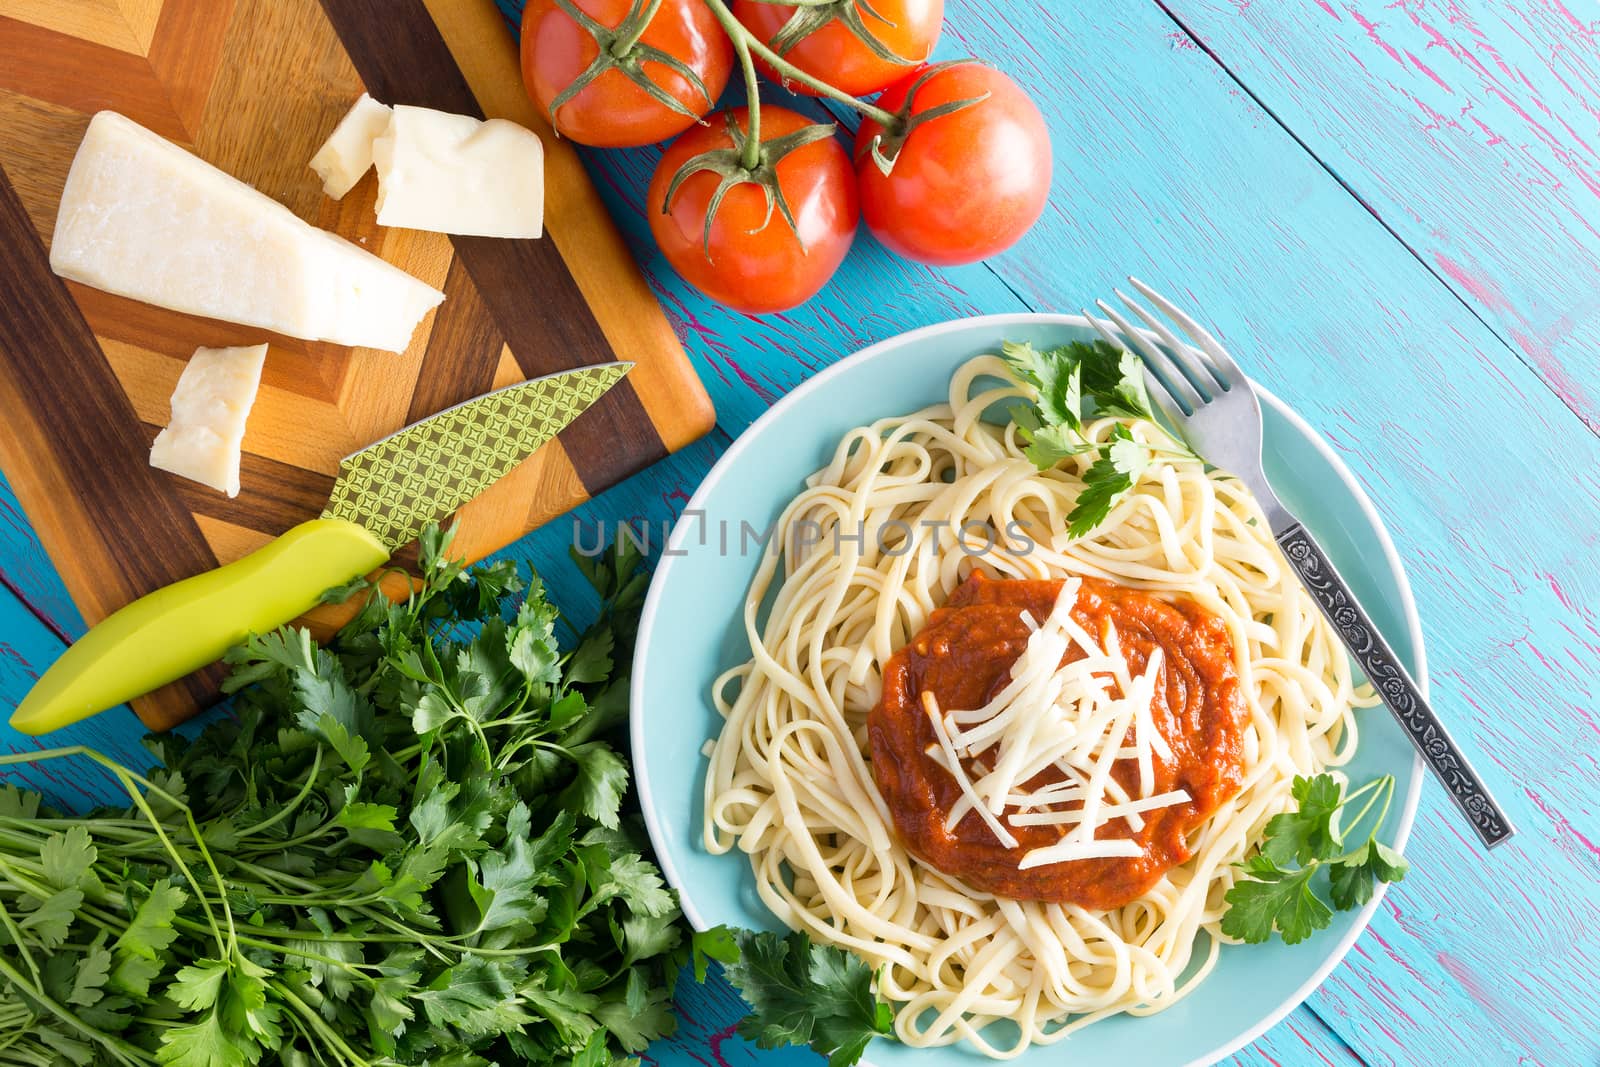 View from above on single plate of freshly prepared spaghetti topped with red sauce, parsley and gruyere cheese next to knife on cutting board with cherry tomatoes over blue table